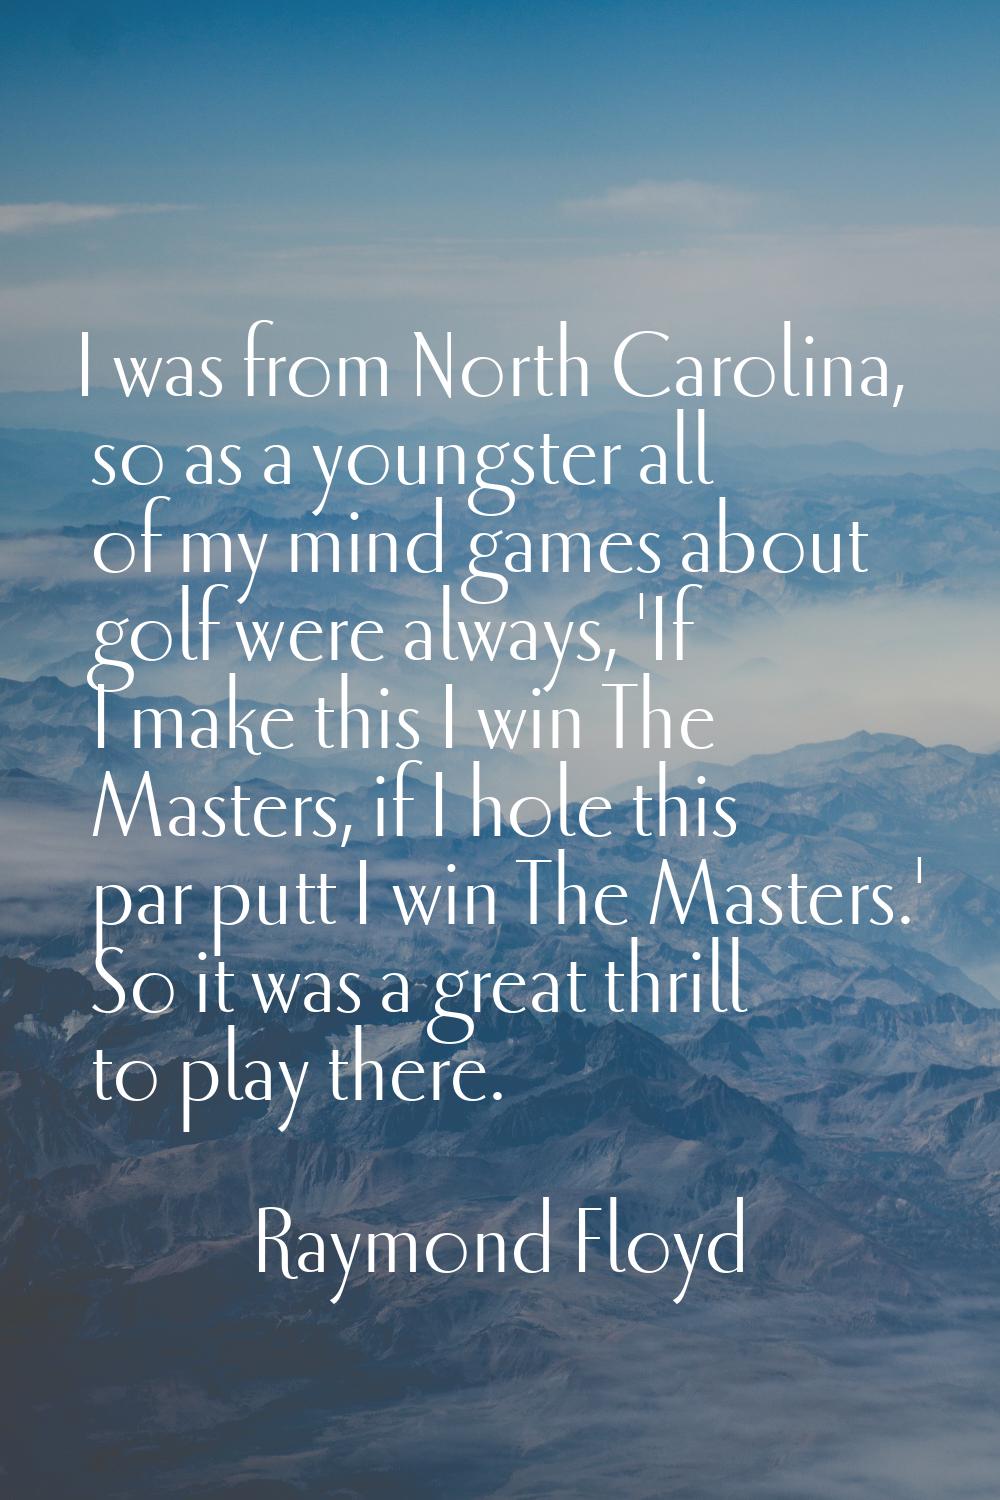 I was from North Carolina, so as a youngster all of my mind games about golf were always, 'If I mak